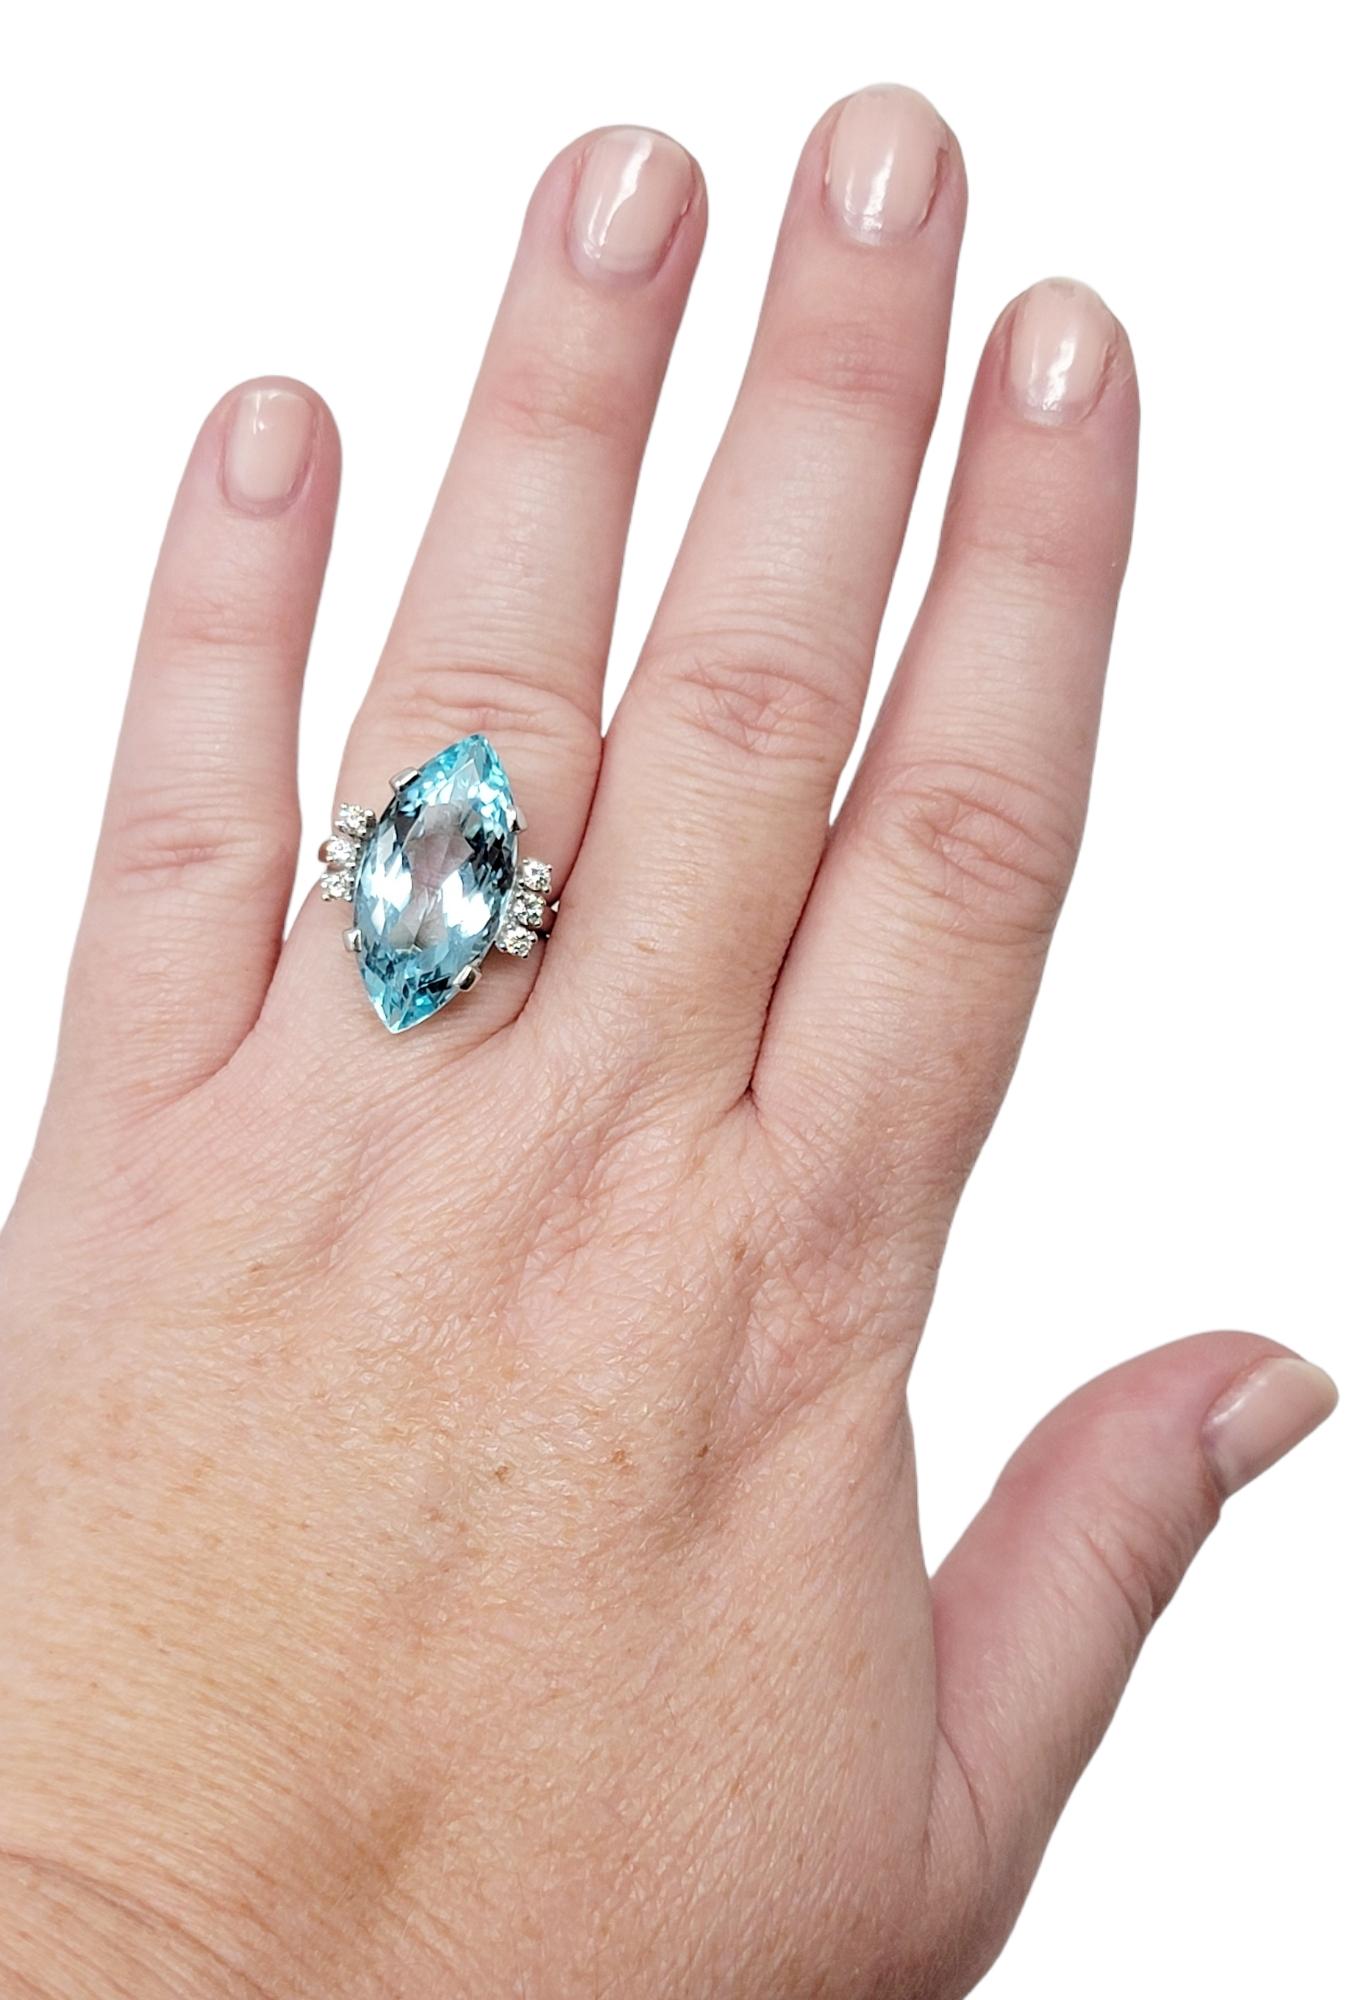 8.61 Carats Total Marquis Cut Aquamarine and Diamond Cocktail Ring 14 Karat Gold For Sale 1